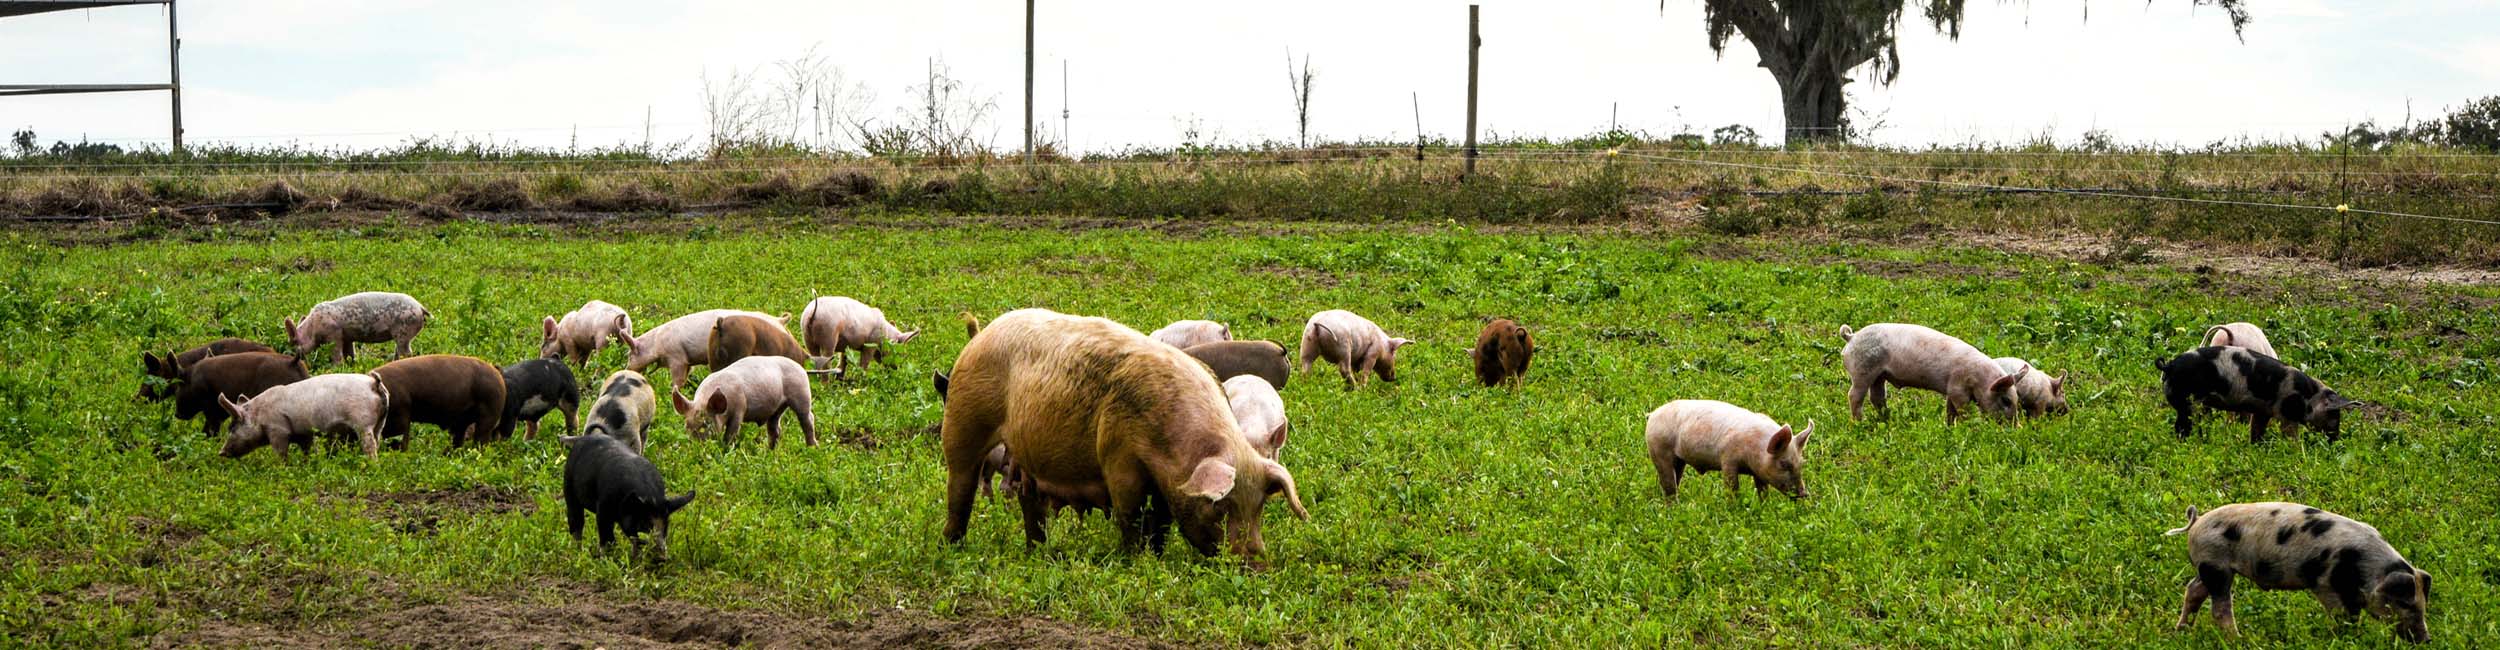 Pigs, large and small, grazing in a field.